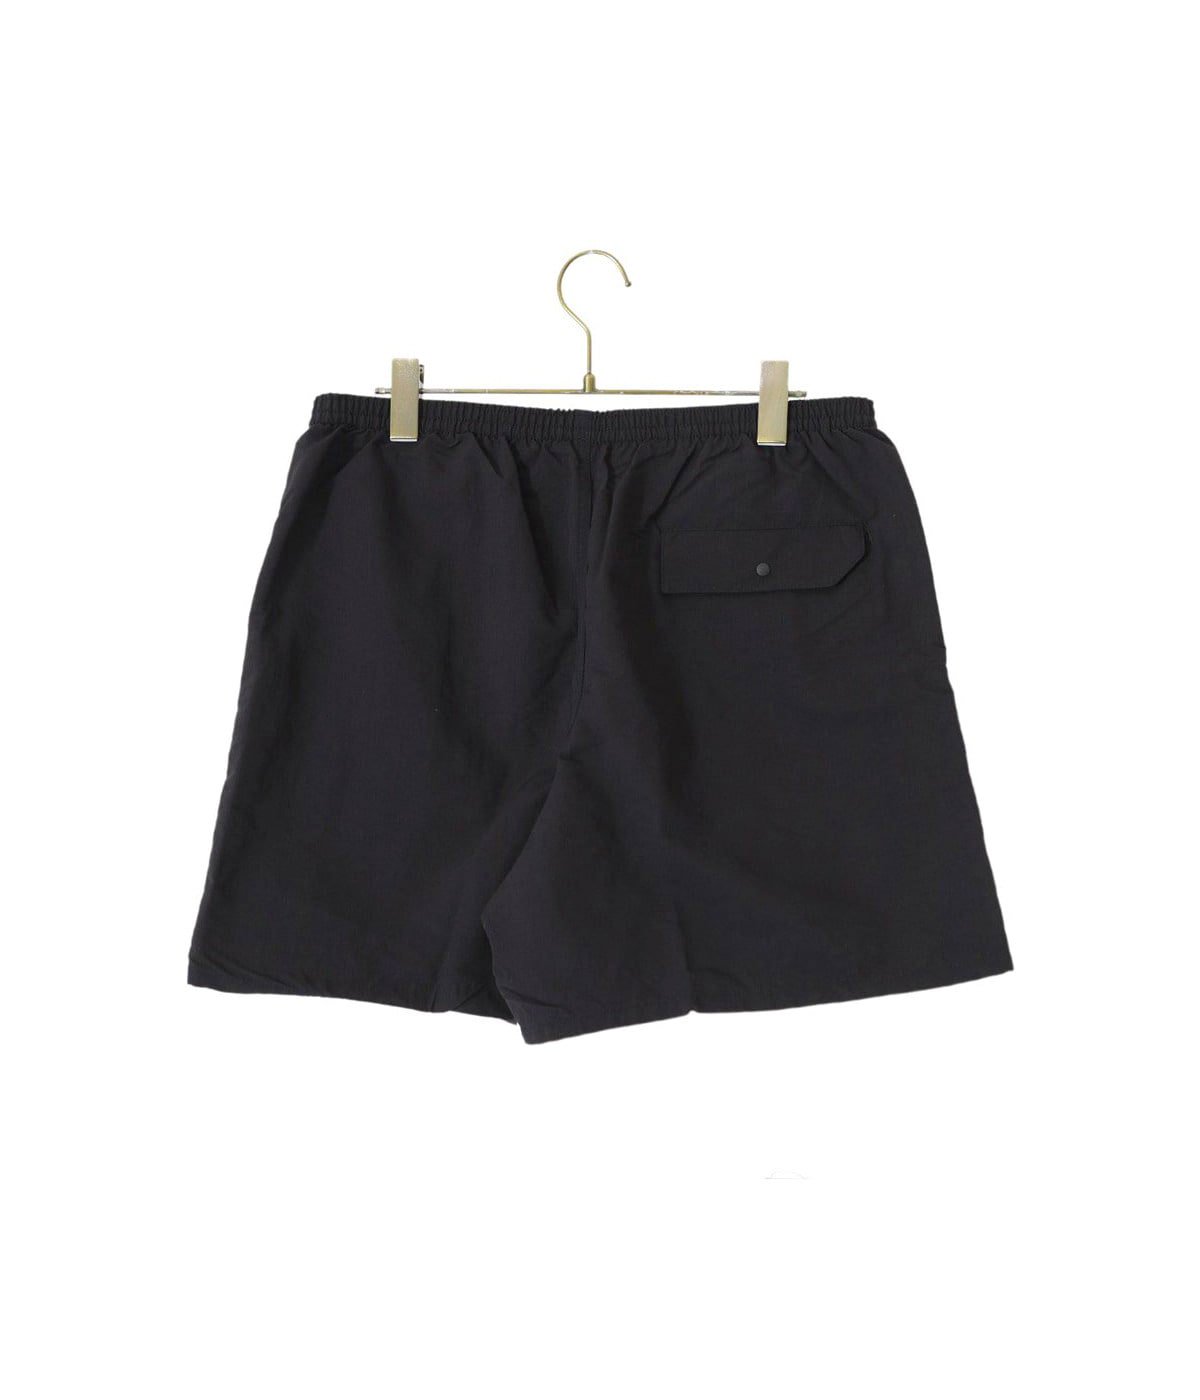 M's Baggies Shorts - 5 in -CPLA-